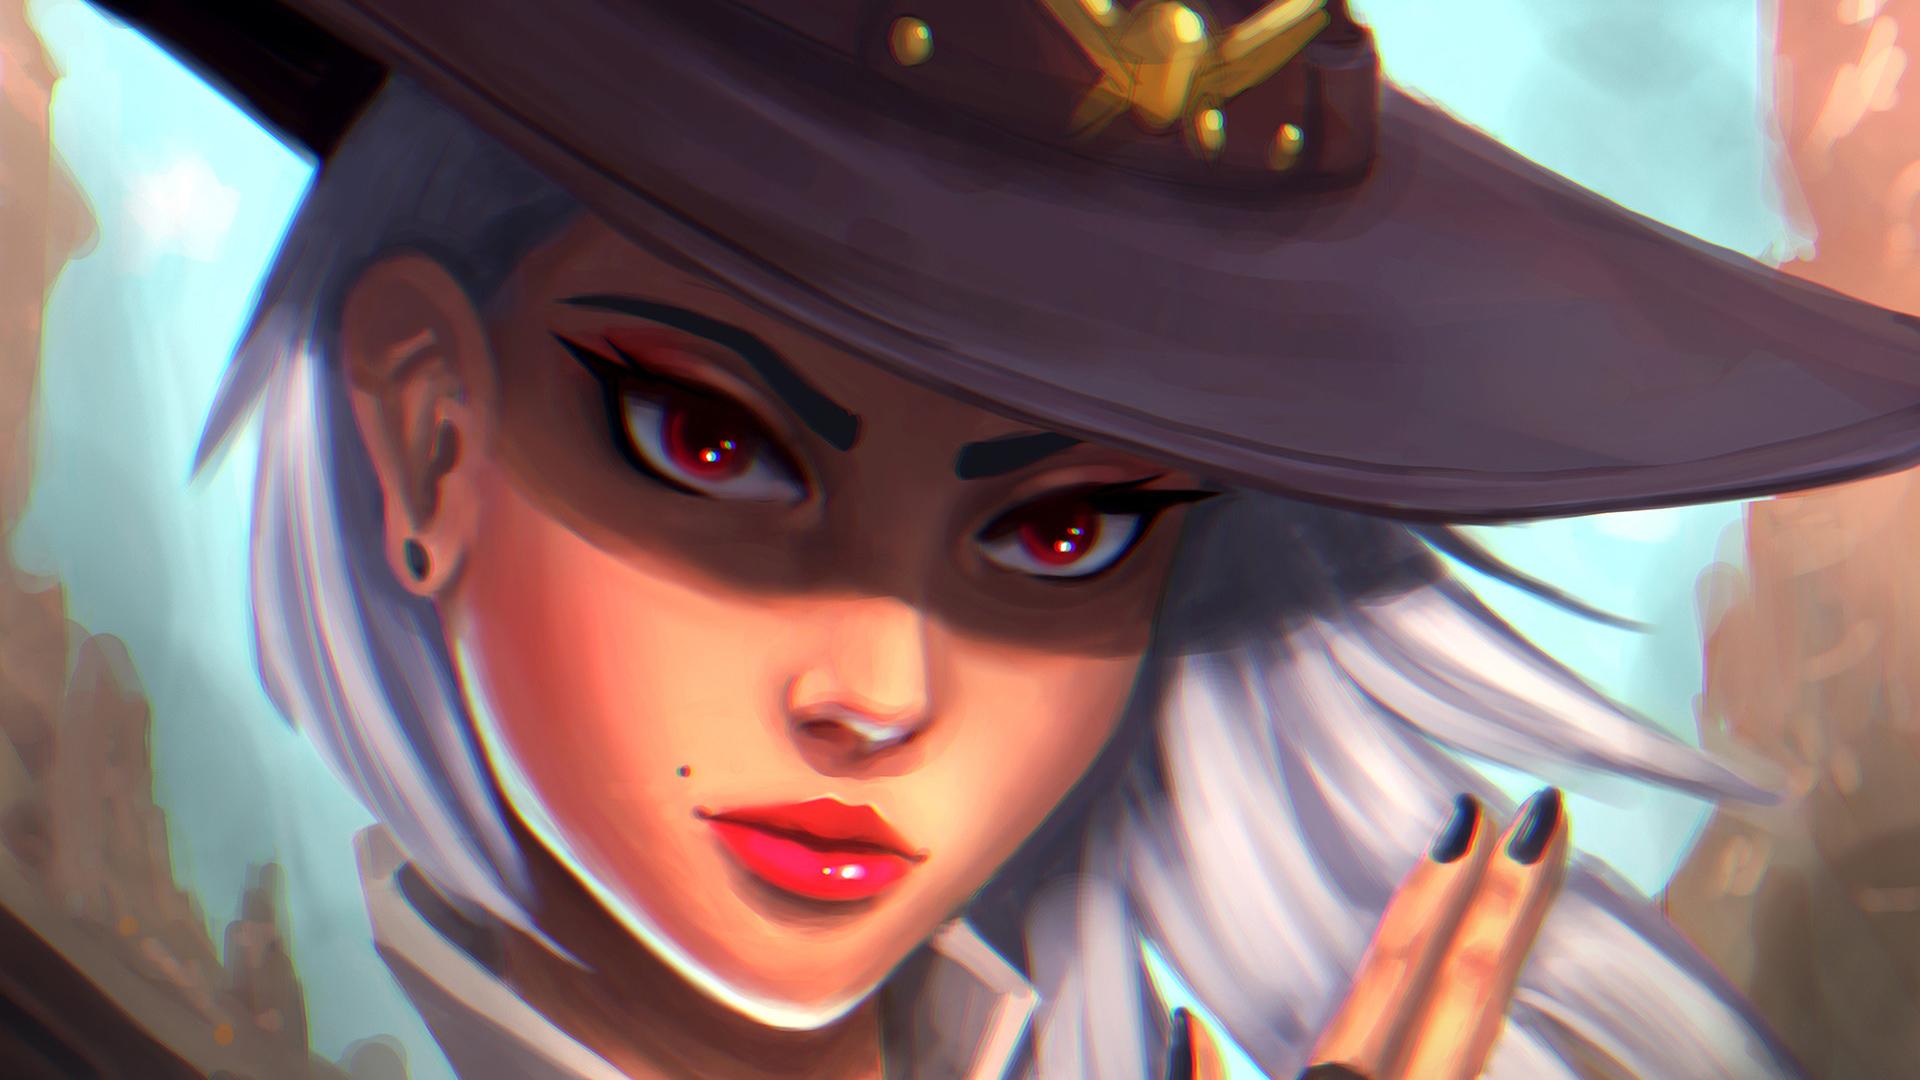 Ashe From Overwatch, HD Games, 4k Wallpapers, Image, Backgrounds